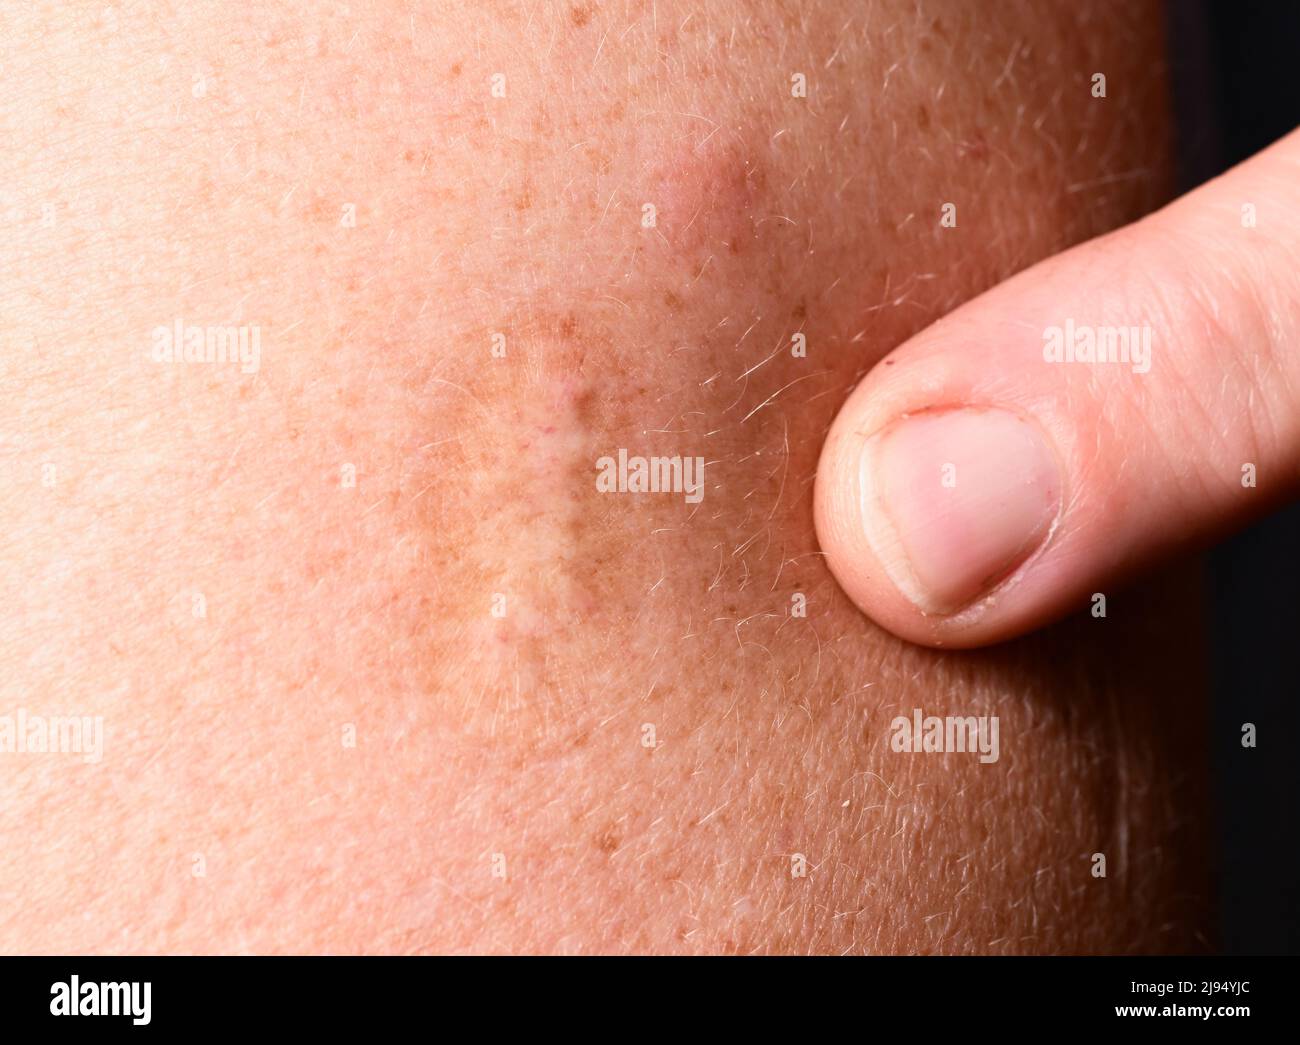 Stuttgart, Germany. 20th May, 2022. A scar from a smallpox vaccination is visible on an upper arm. Smallpox was long considered one of the most dangerous diseases for humans. Vaccines saved the day, and since 1980 the world has been considered free of smallpox. In the meantime, more and more countries are reporting evidence and suspected cases of monkeypox. There is no approved vaccination specifically against monkeypox. According to historical data, however, a smallpox vaccination provides good protection against monkeypox - and probably for life. Credit: Bernd Weißbrod/dpa/Alamy Live News Stock Photo